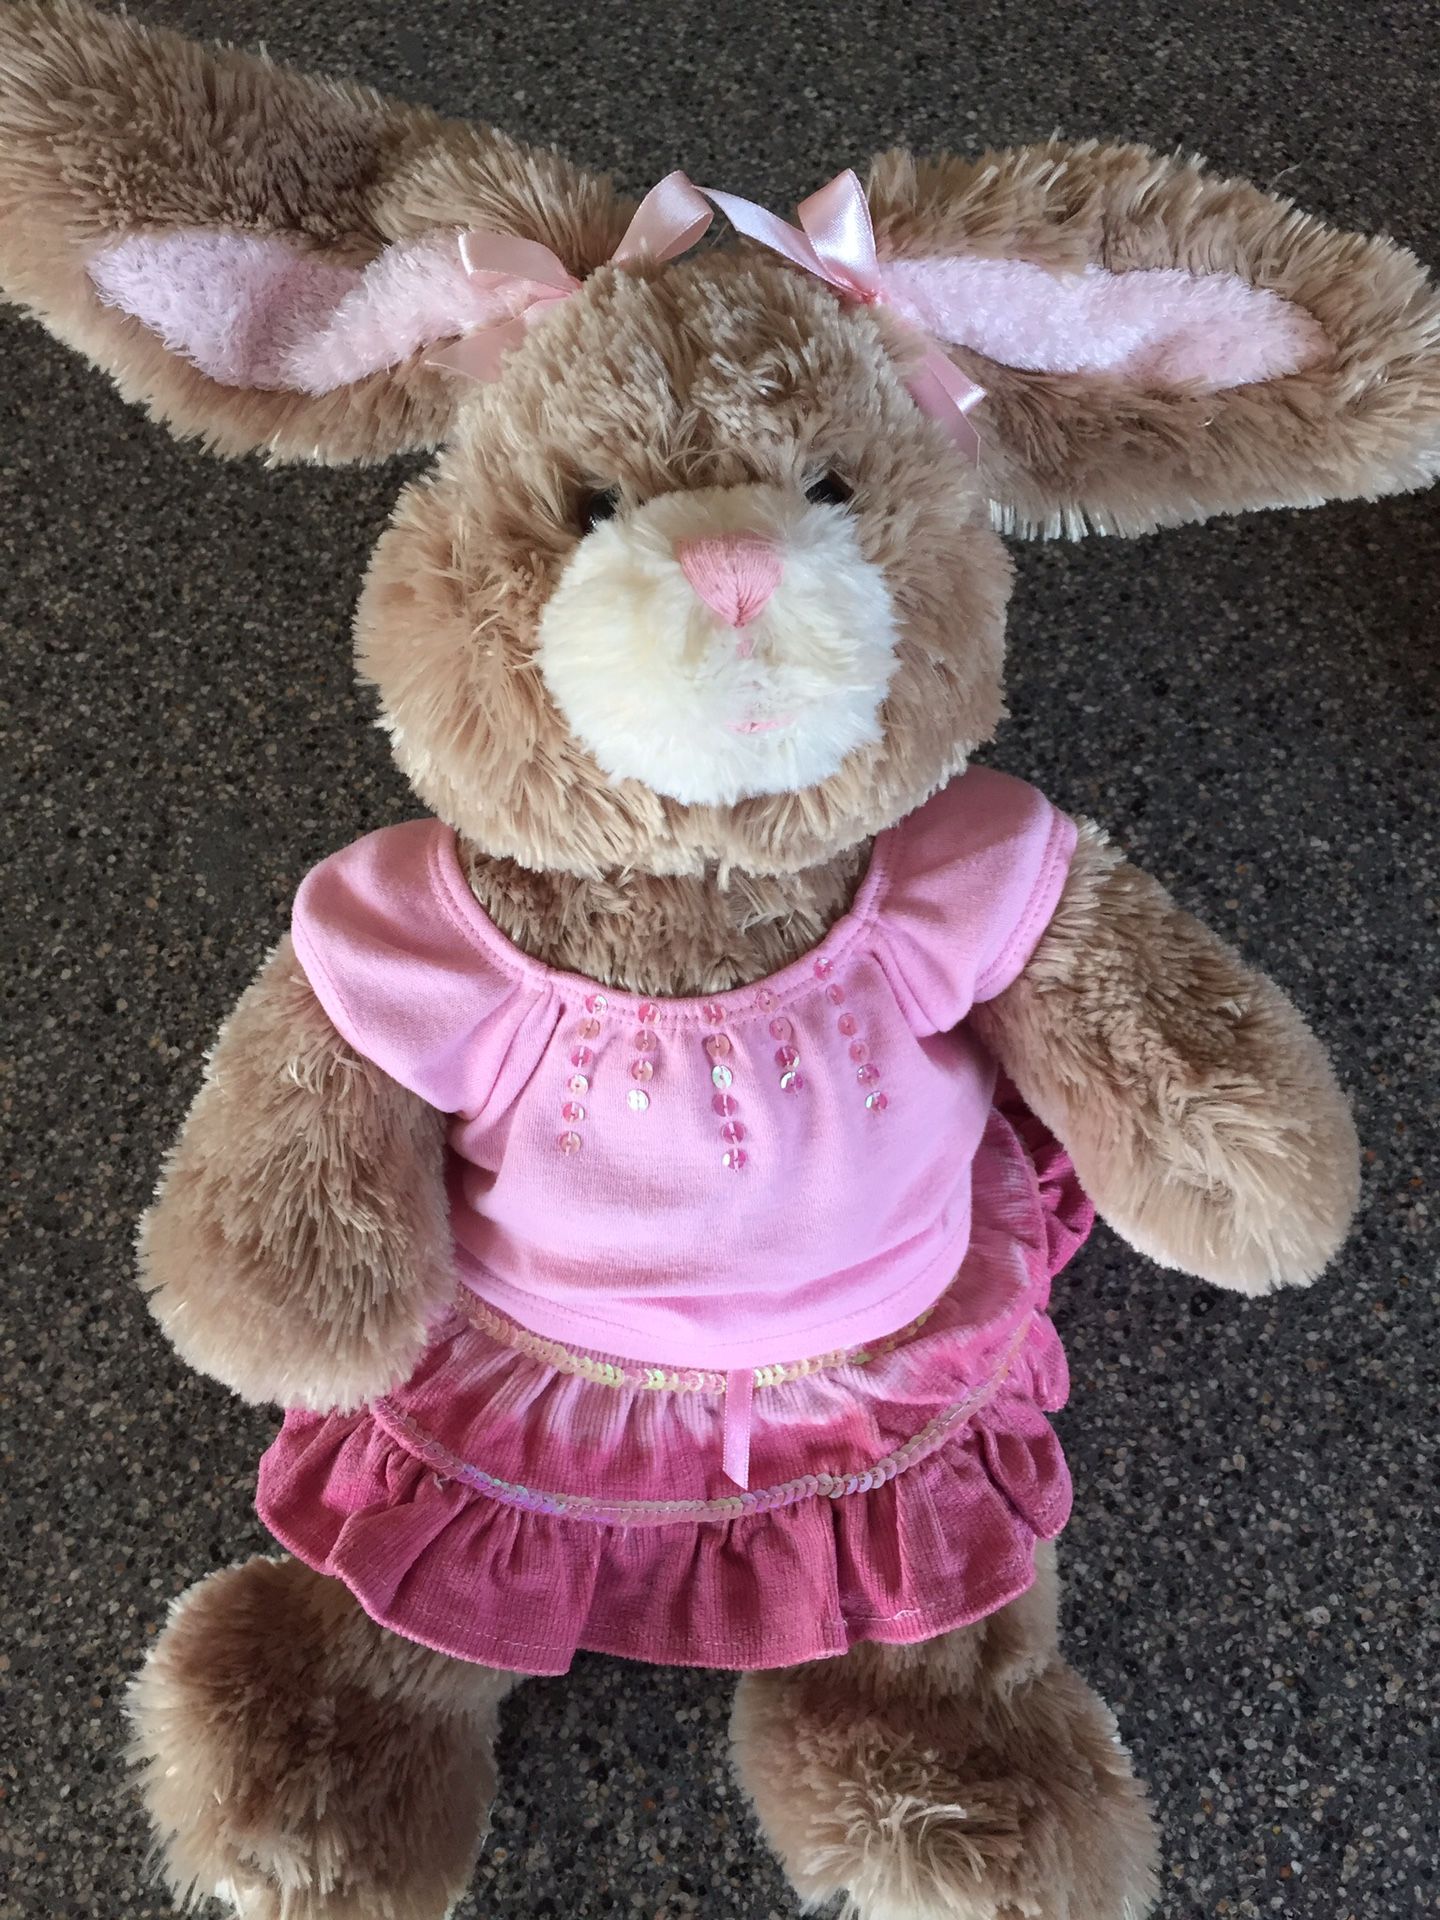 🐰 New BUILD A BEAR Workshop 22” EASTER BUNNY, Large Size Plush Stuffed Bunny Rabbit plus Build a Bear Pink 2 Piece Easter Outfit, Great for the Eas